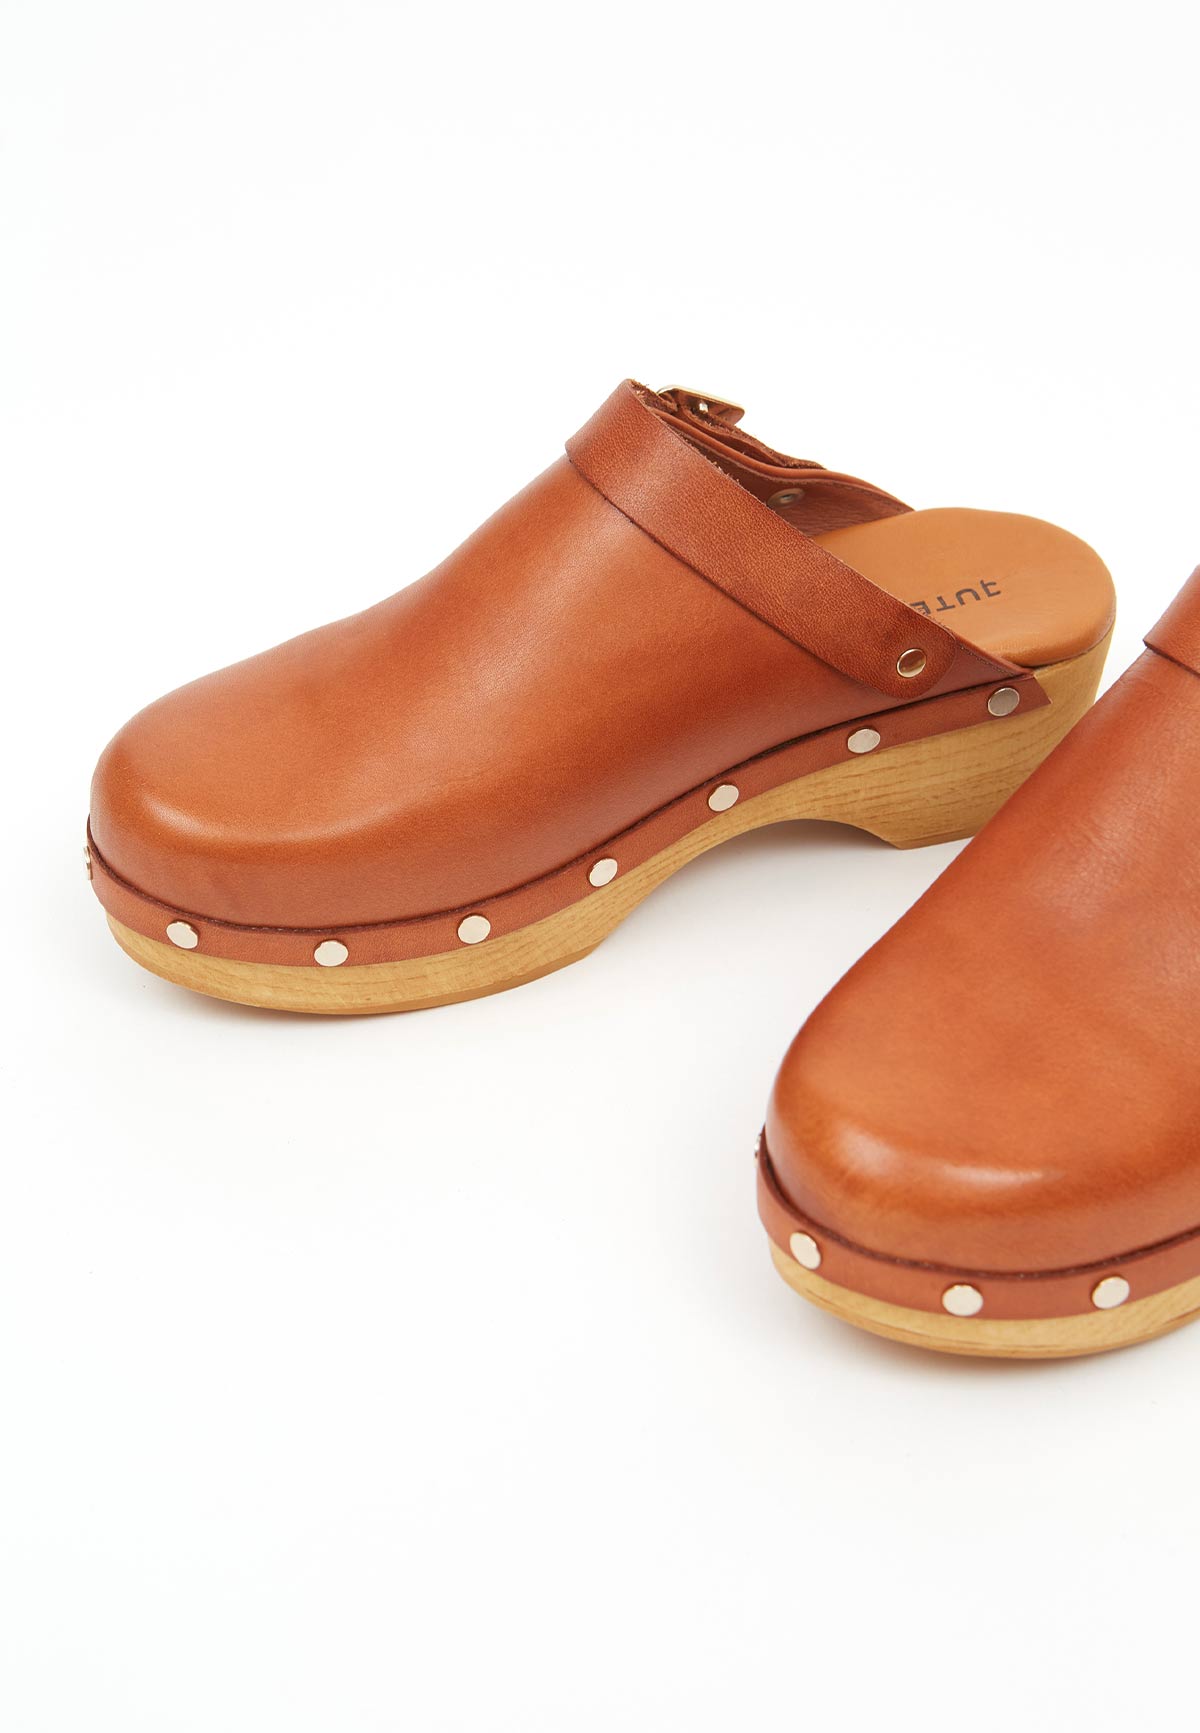 LEATHER CLOGS - Moeon